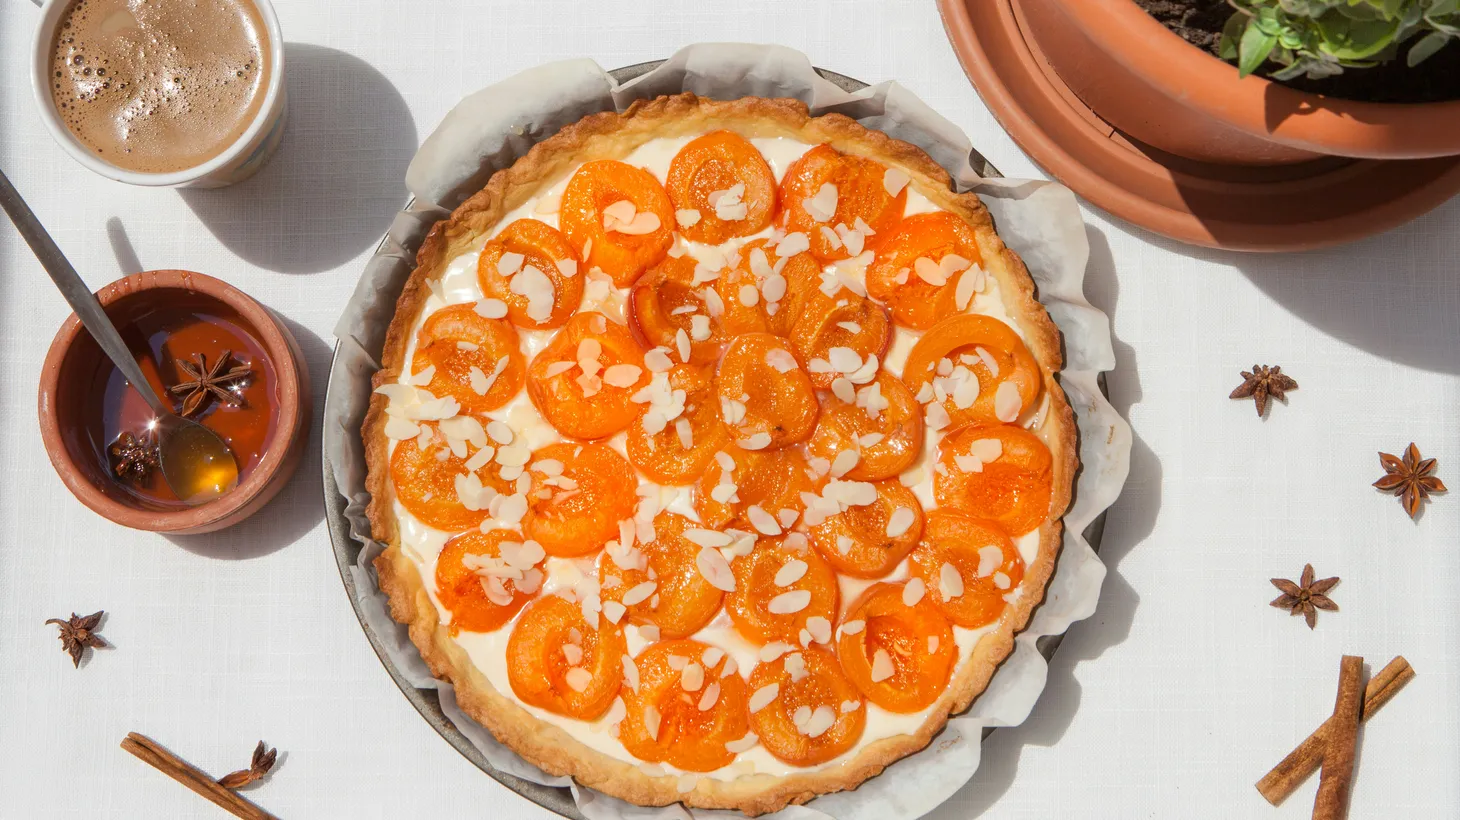 An apricot tart makes sweet use of summer produce.